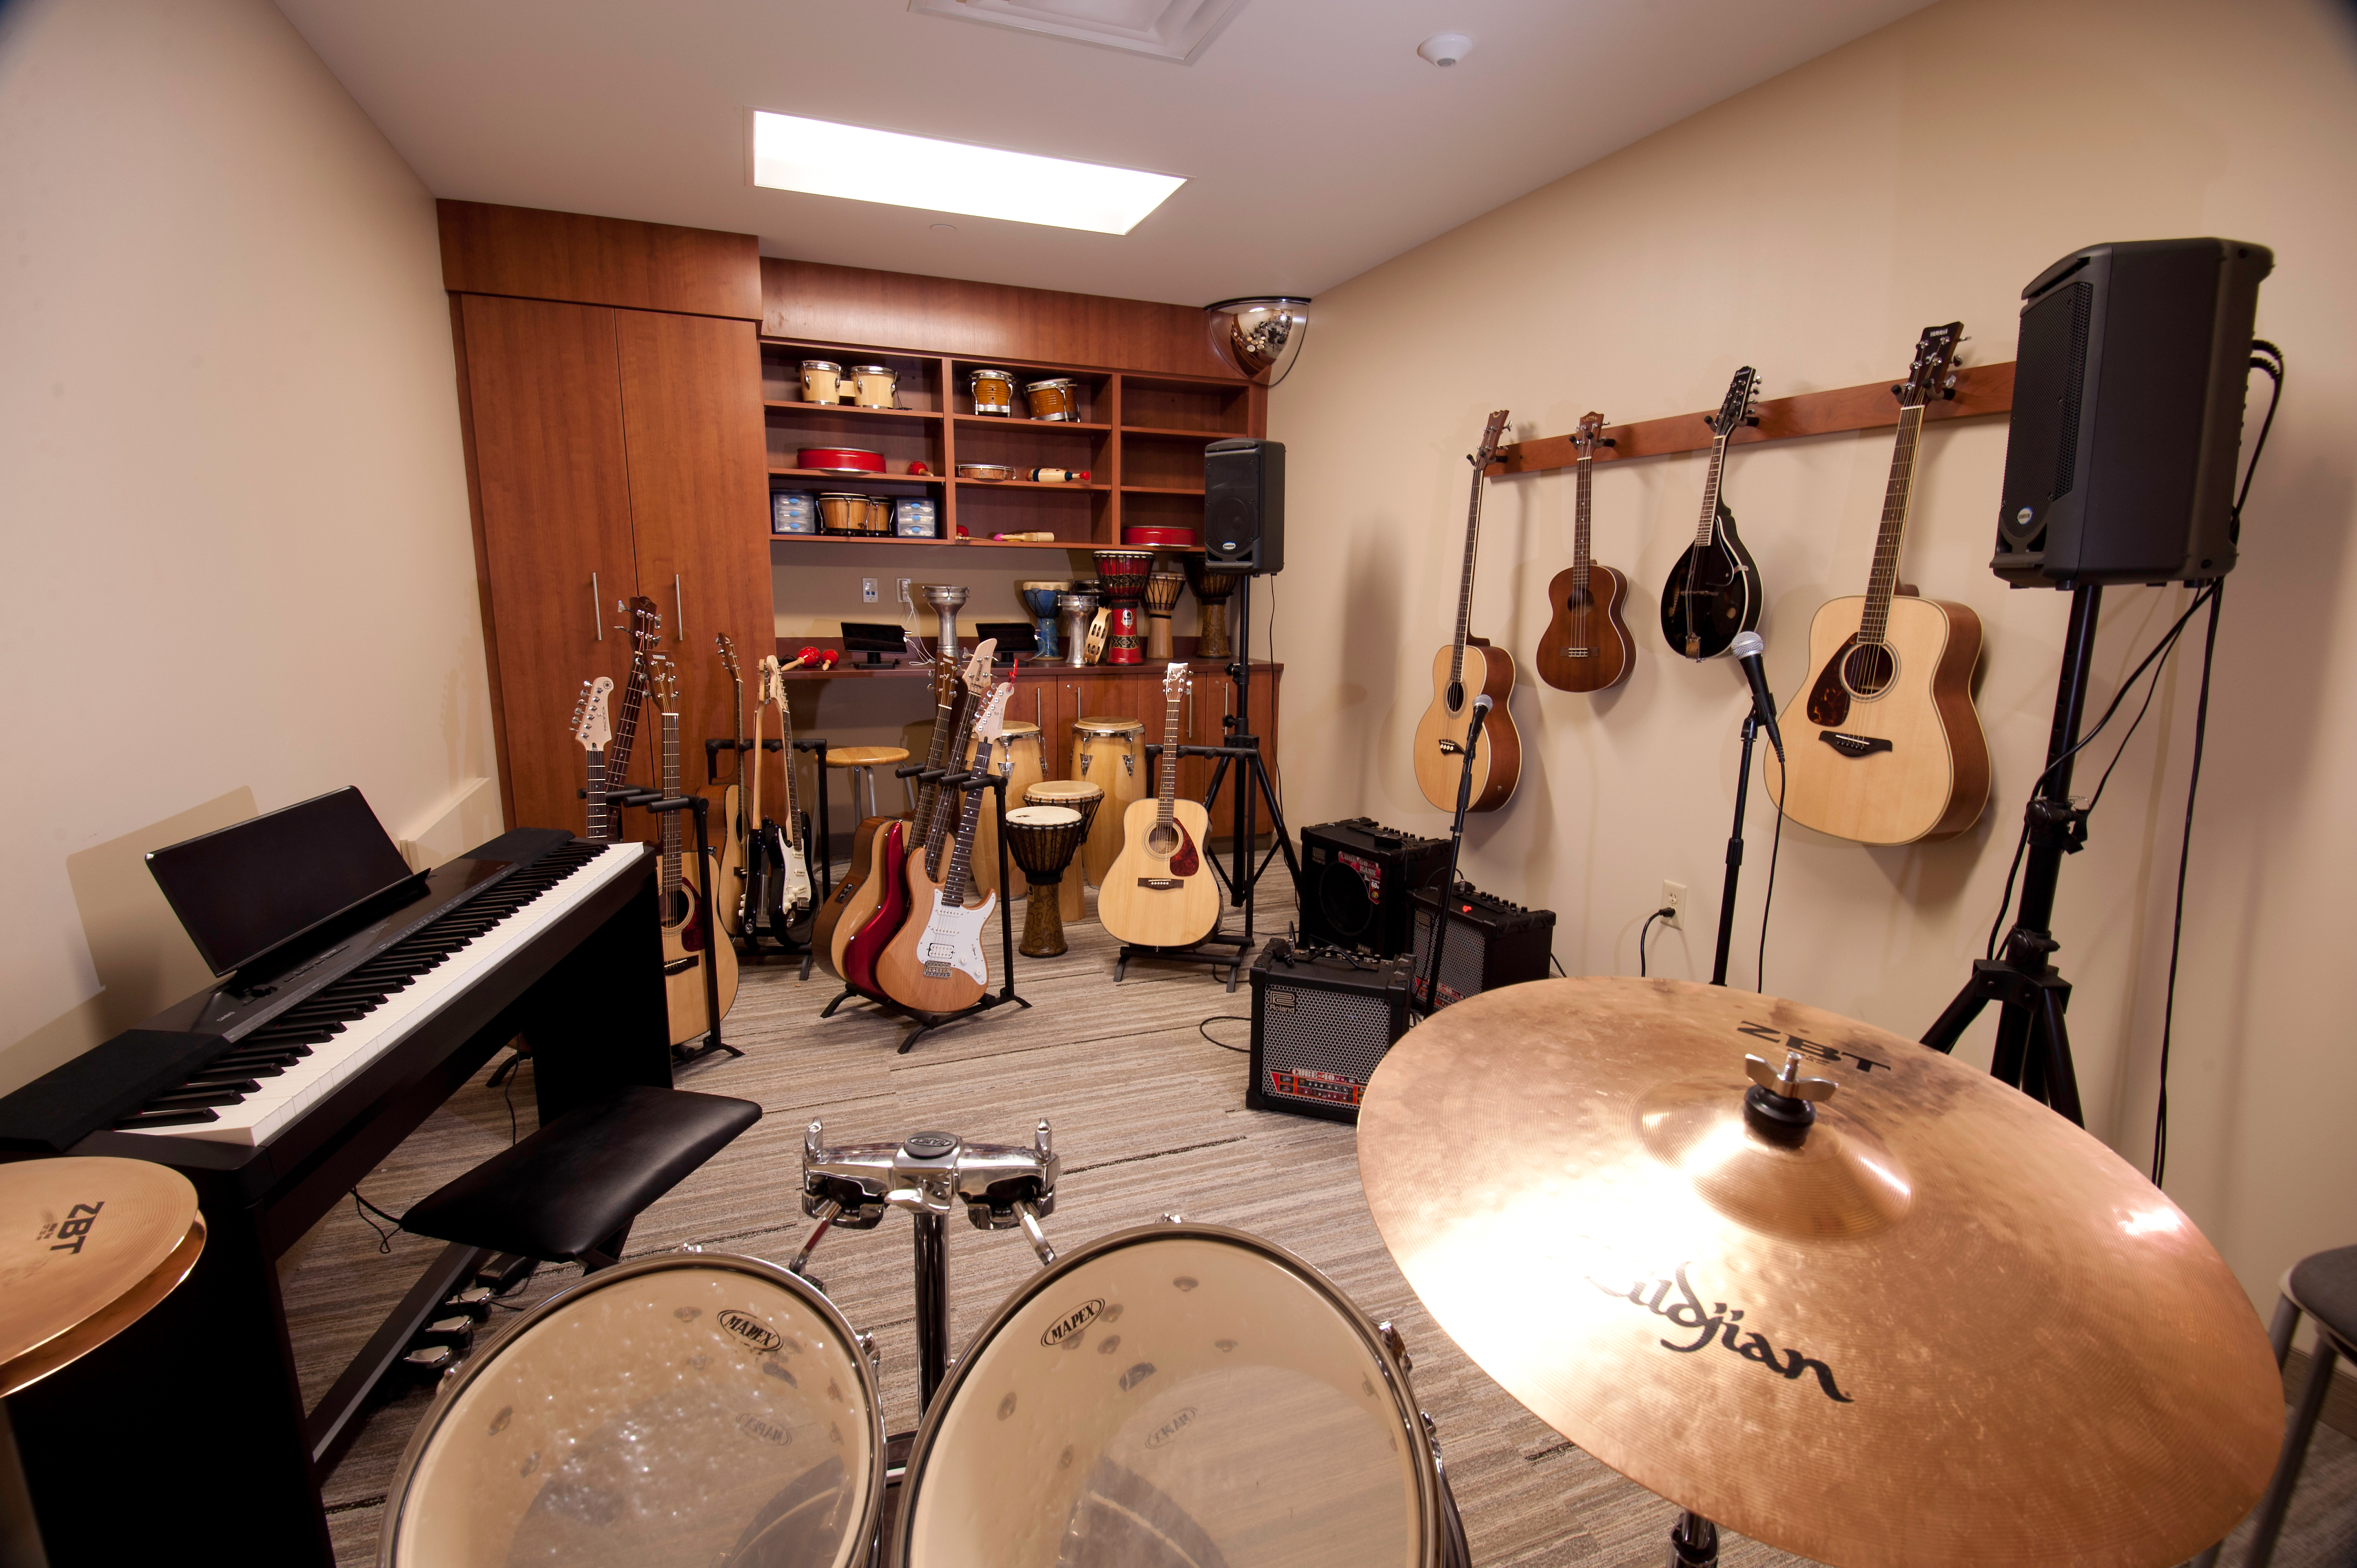 The Plymouth music room full of instruments like a piano, guitars, and a drum set